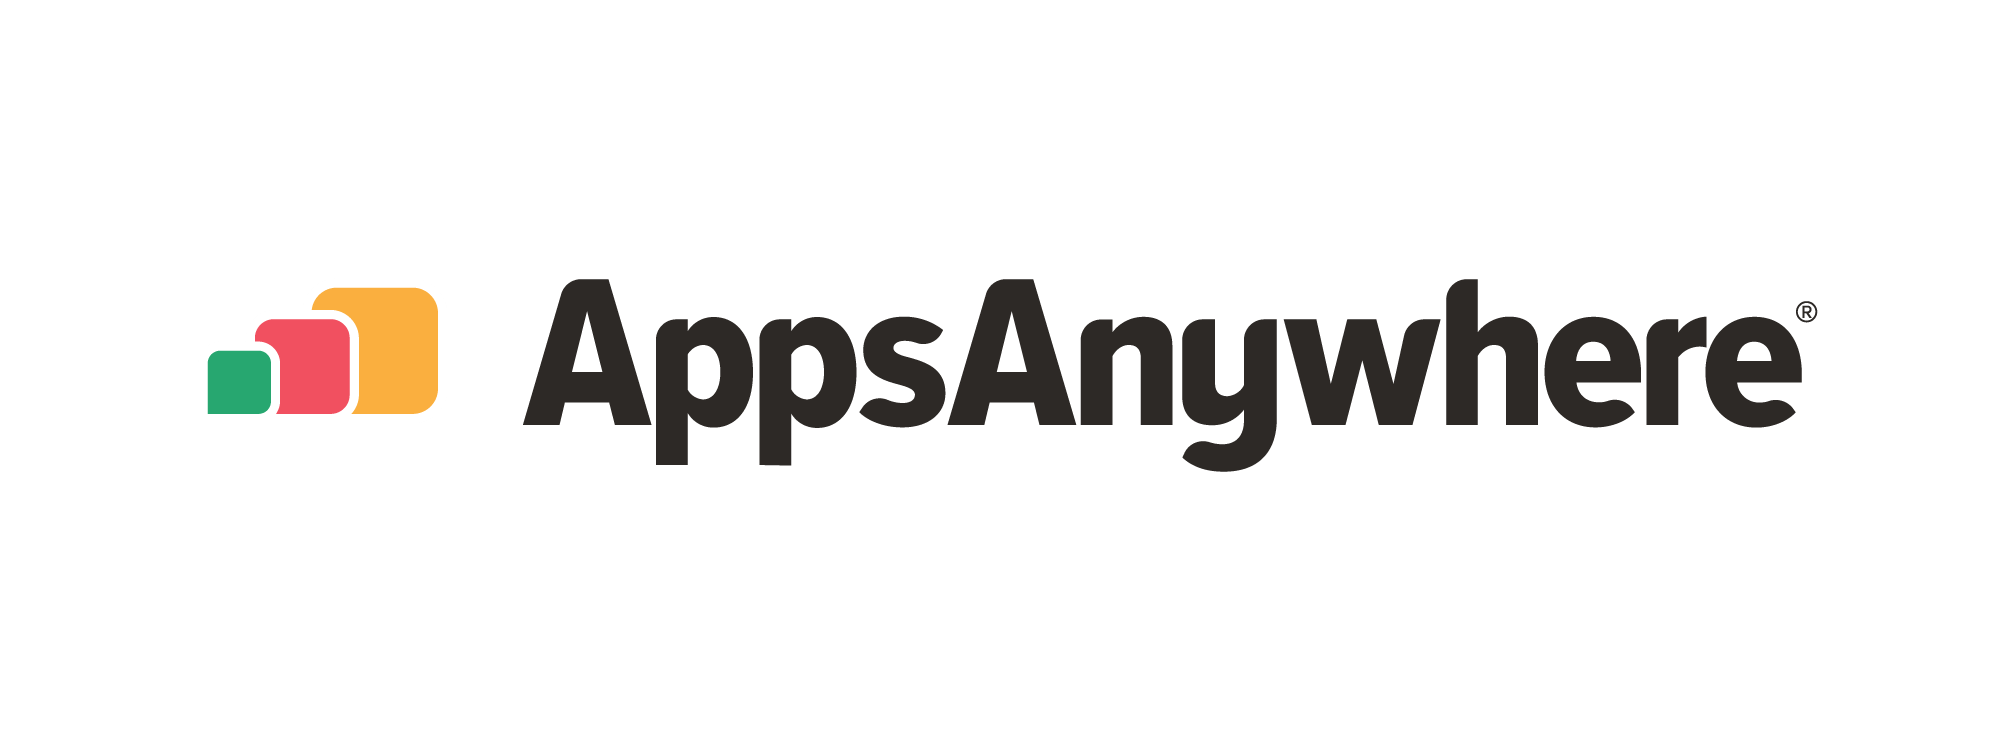 appsanywhere-black-R-cropped